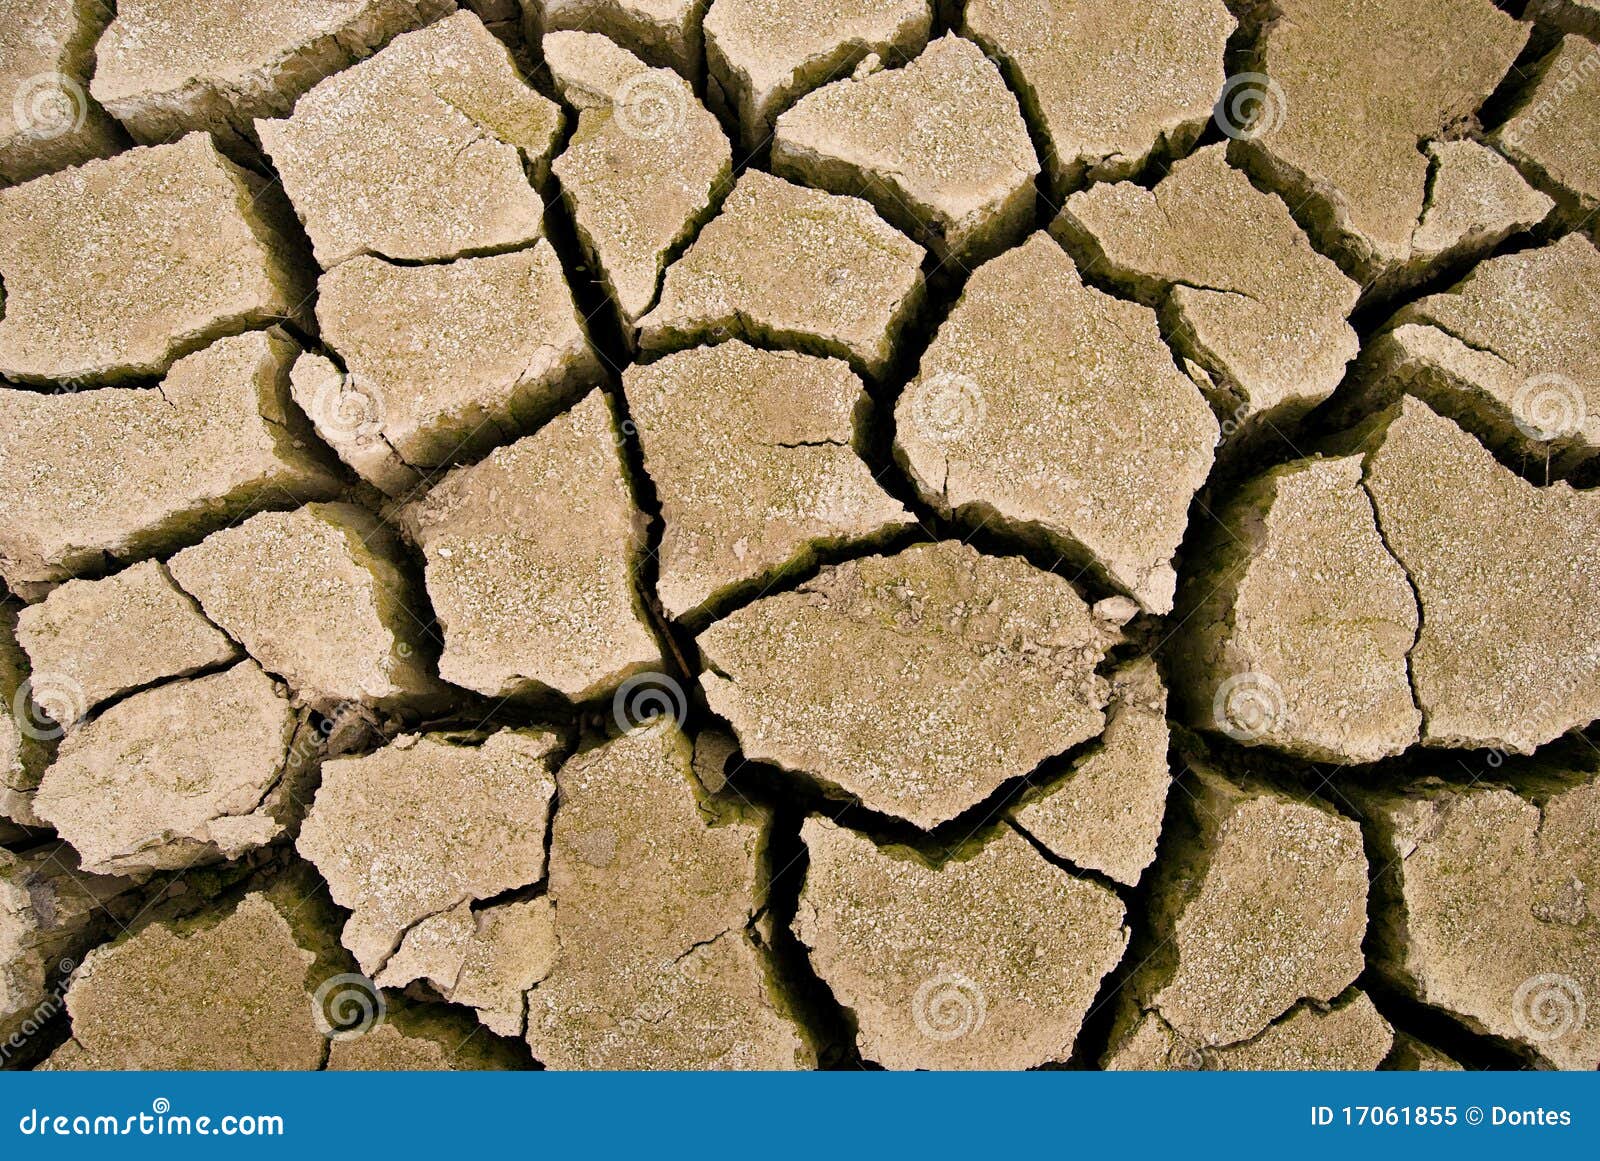 cracks in the parched earth